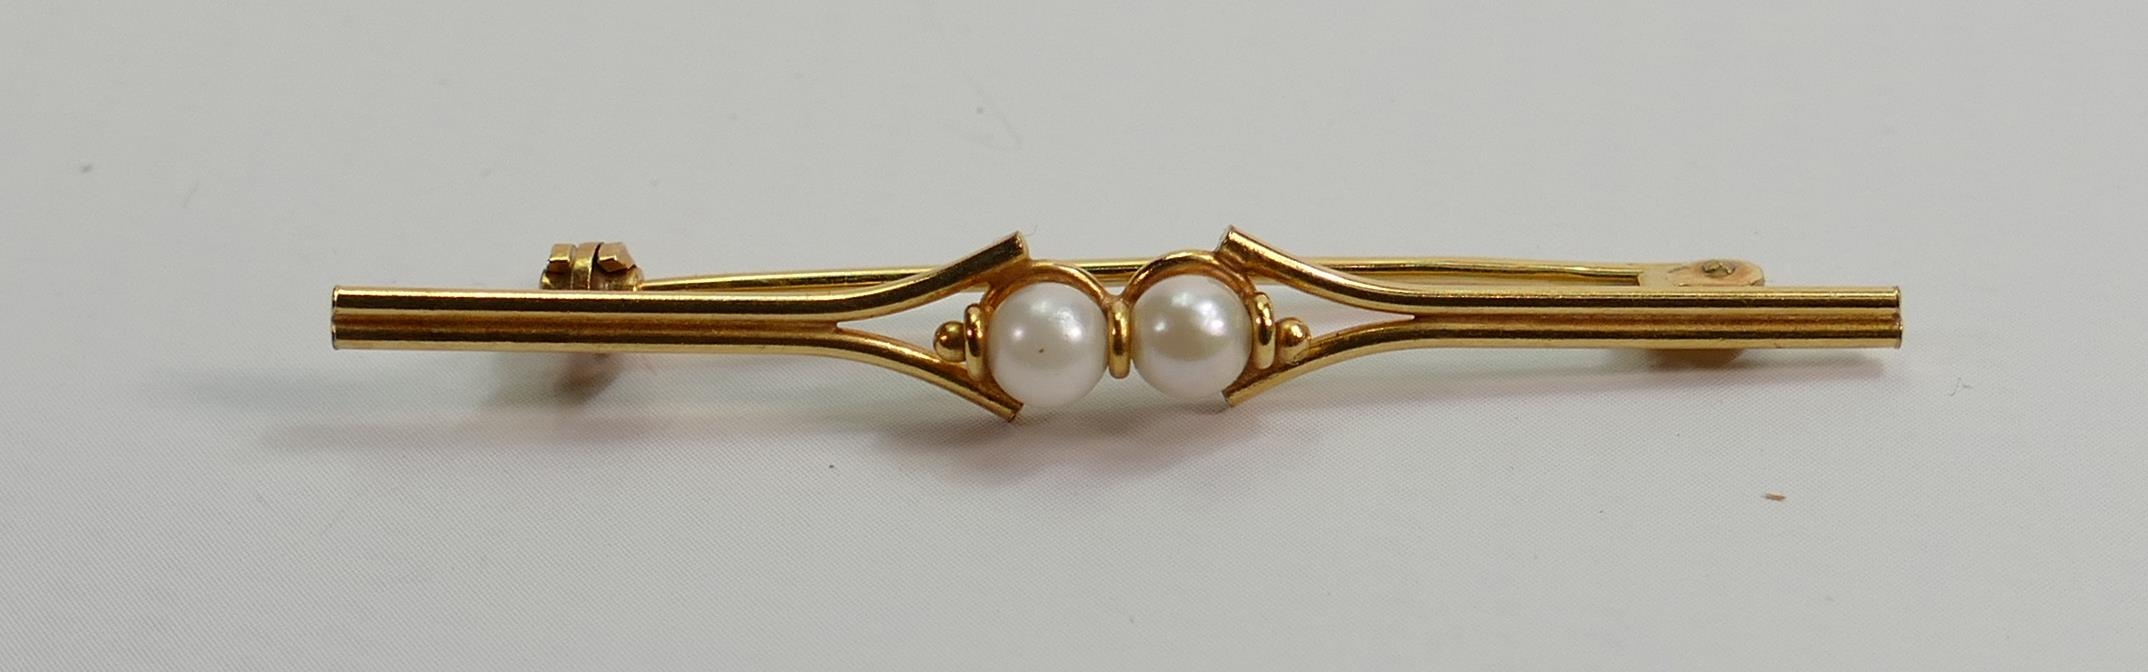 9ct gold bar brooch set with pearls, 2.4g: